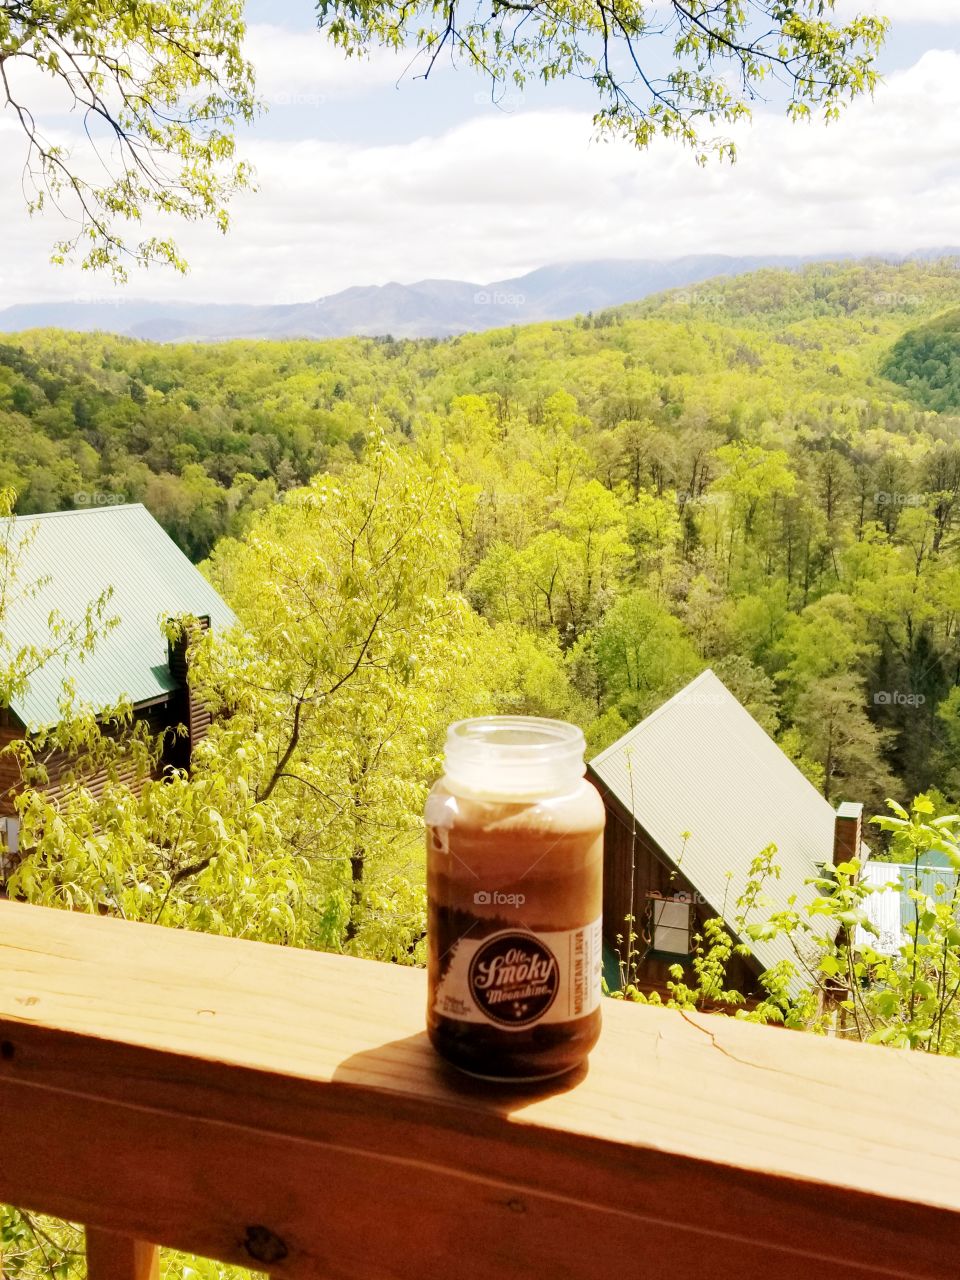 Smoky mountain liquid breakfast in a jar, creamy java Ole Smoky moonshine for a great morning with a spectacular view of fluffy white cloud filled sky.